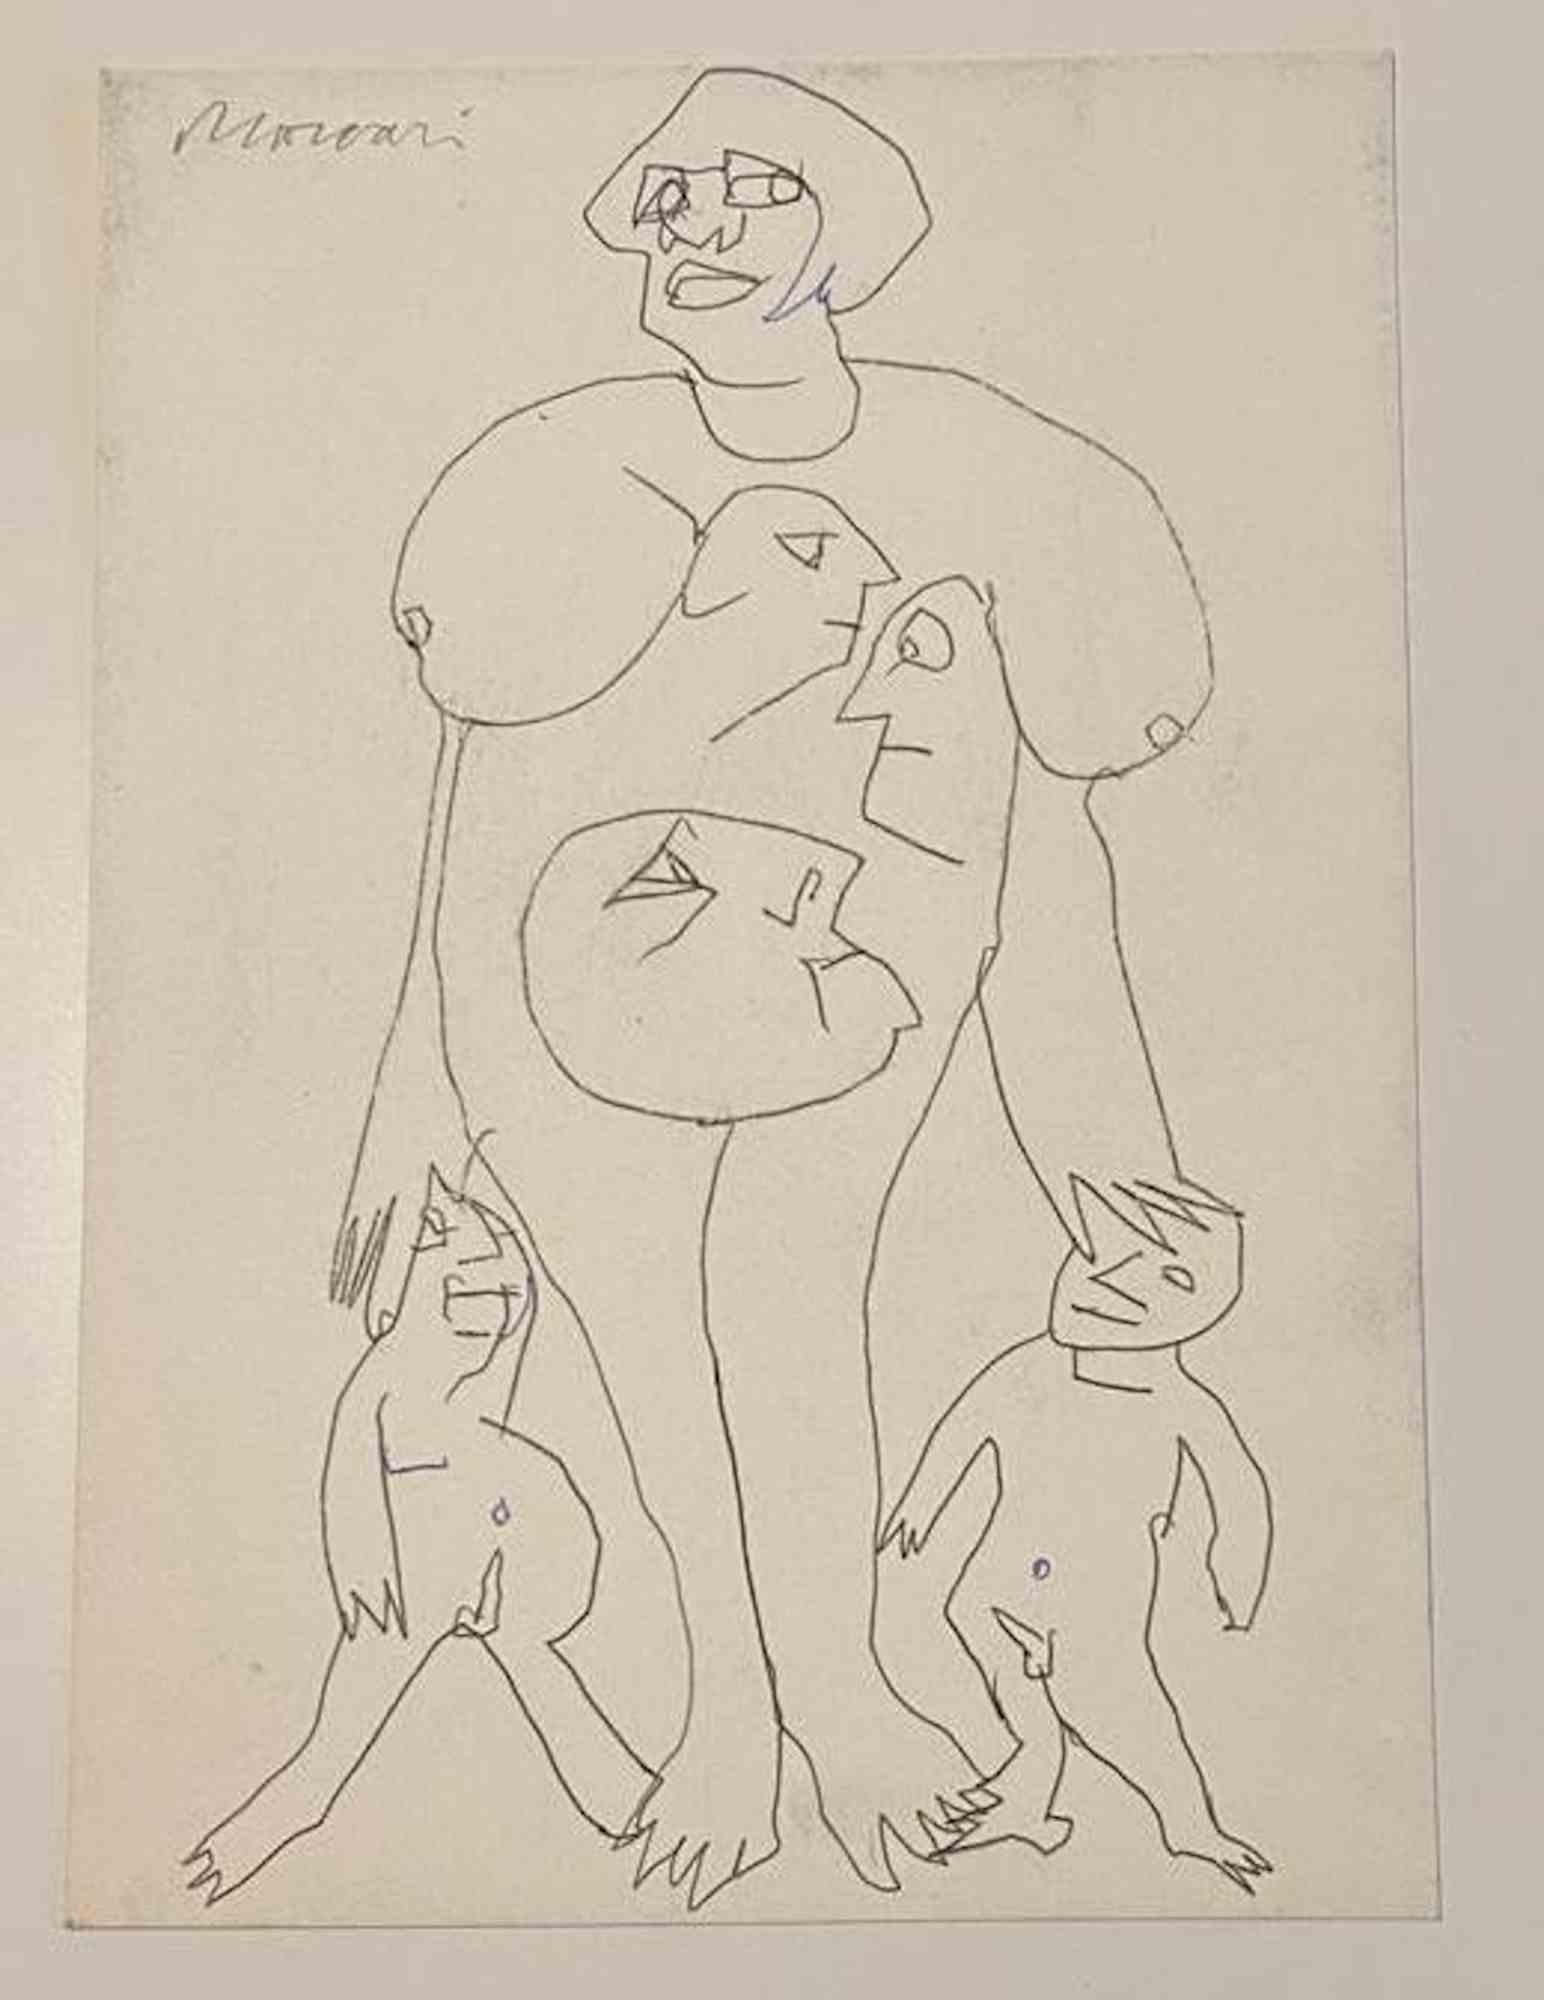 Strange Personality is a pen Drawing realized by Mino Maccari  (1924-1989) in the Mid-20th Century.

Hand-signed on the lower.

Good conditions.

Mino Maccari (Siena, 1924-Rome, June 16, 1989) was an Italian writer, painter, engraver and journalist,